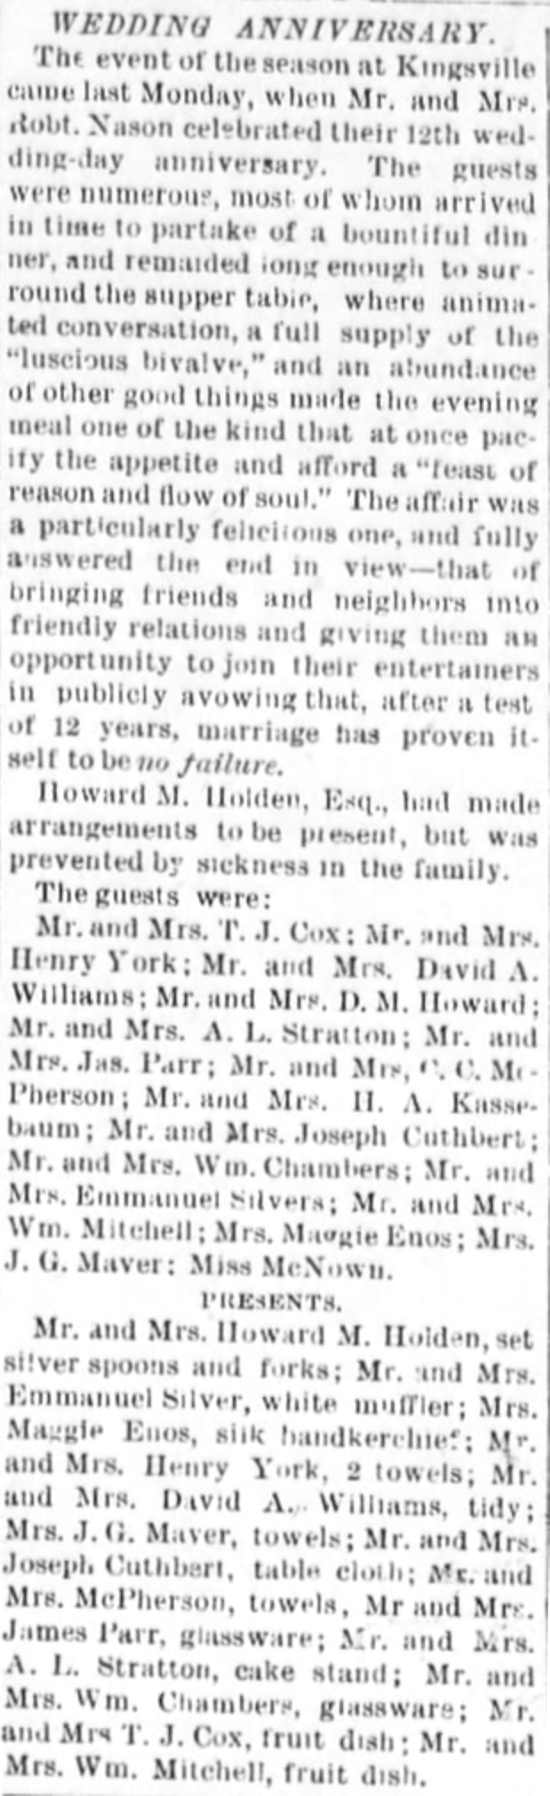 Kristin Holt | Victorian-American Wedding Anniversaries, published in The Rossville Times of Rossville, Kansas on November 21, 1890. Note that guests are listed as are their gifts.